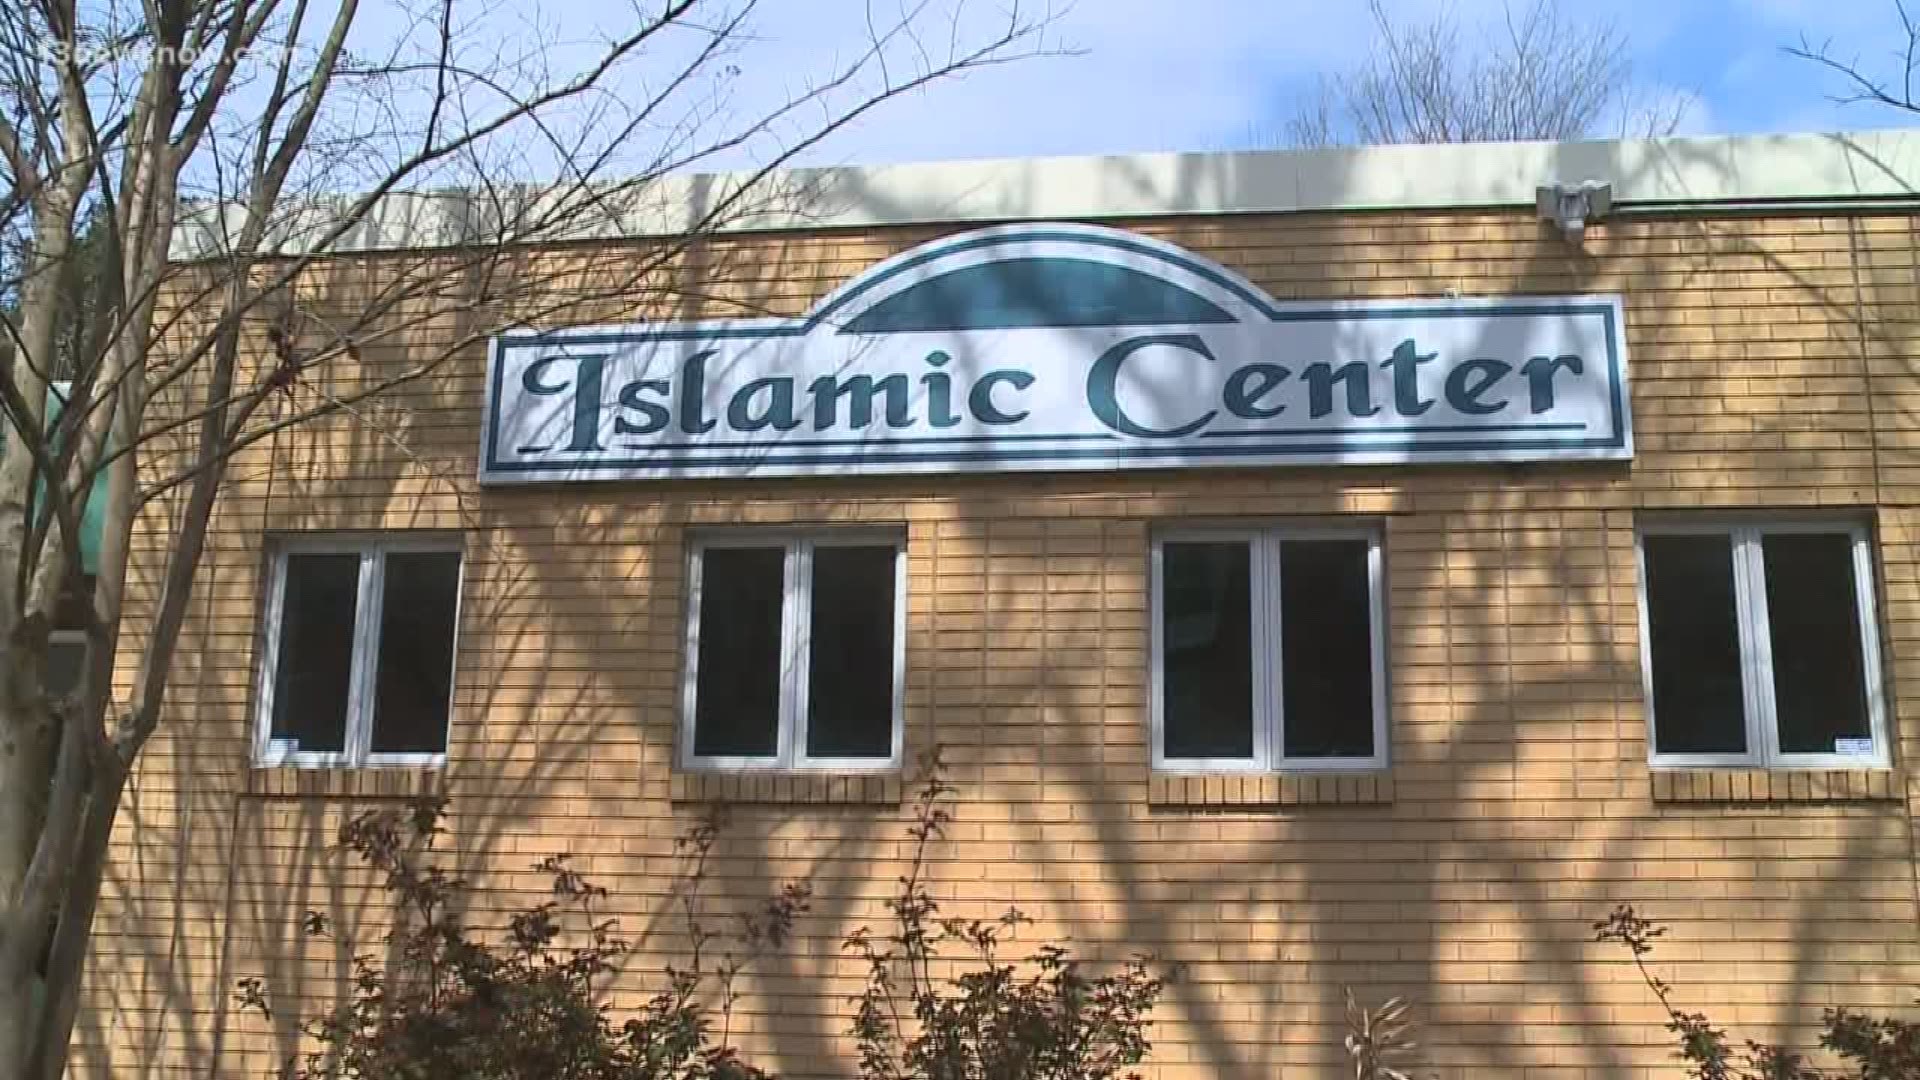 An inter-faith group is praying at the Islamic Center across from Old Dominion University for everyone affected by the mosque shooting in New Zealand at a vigil organized by ODU.